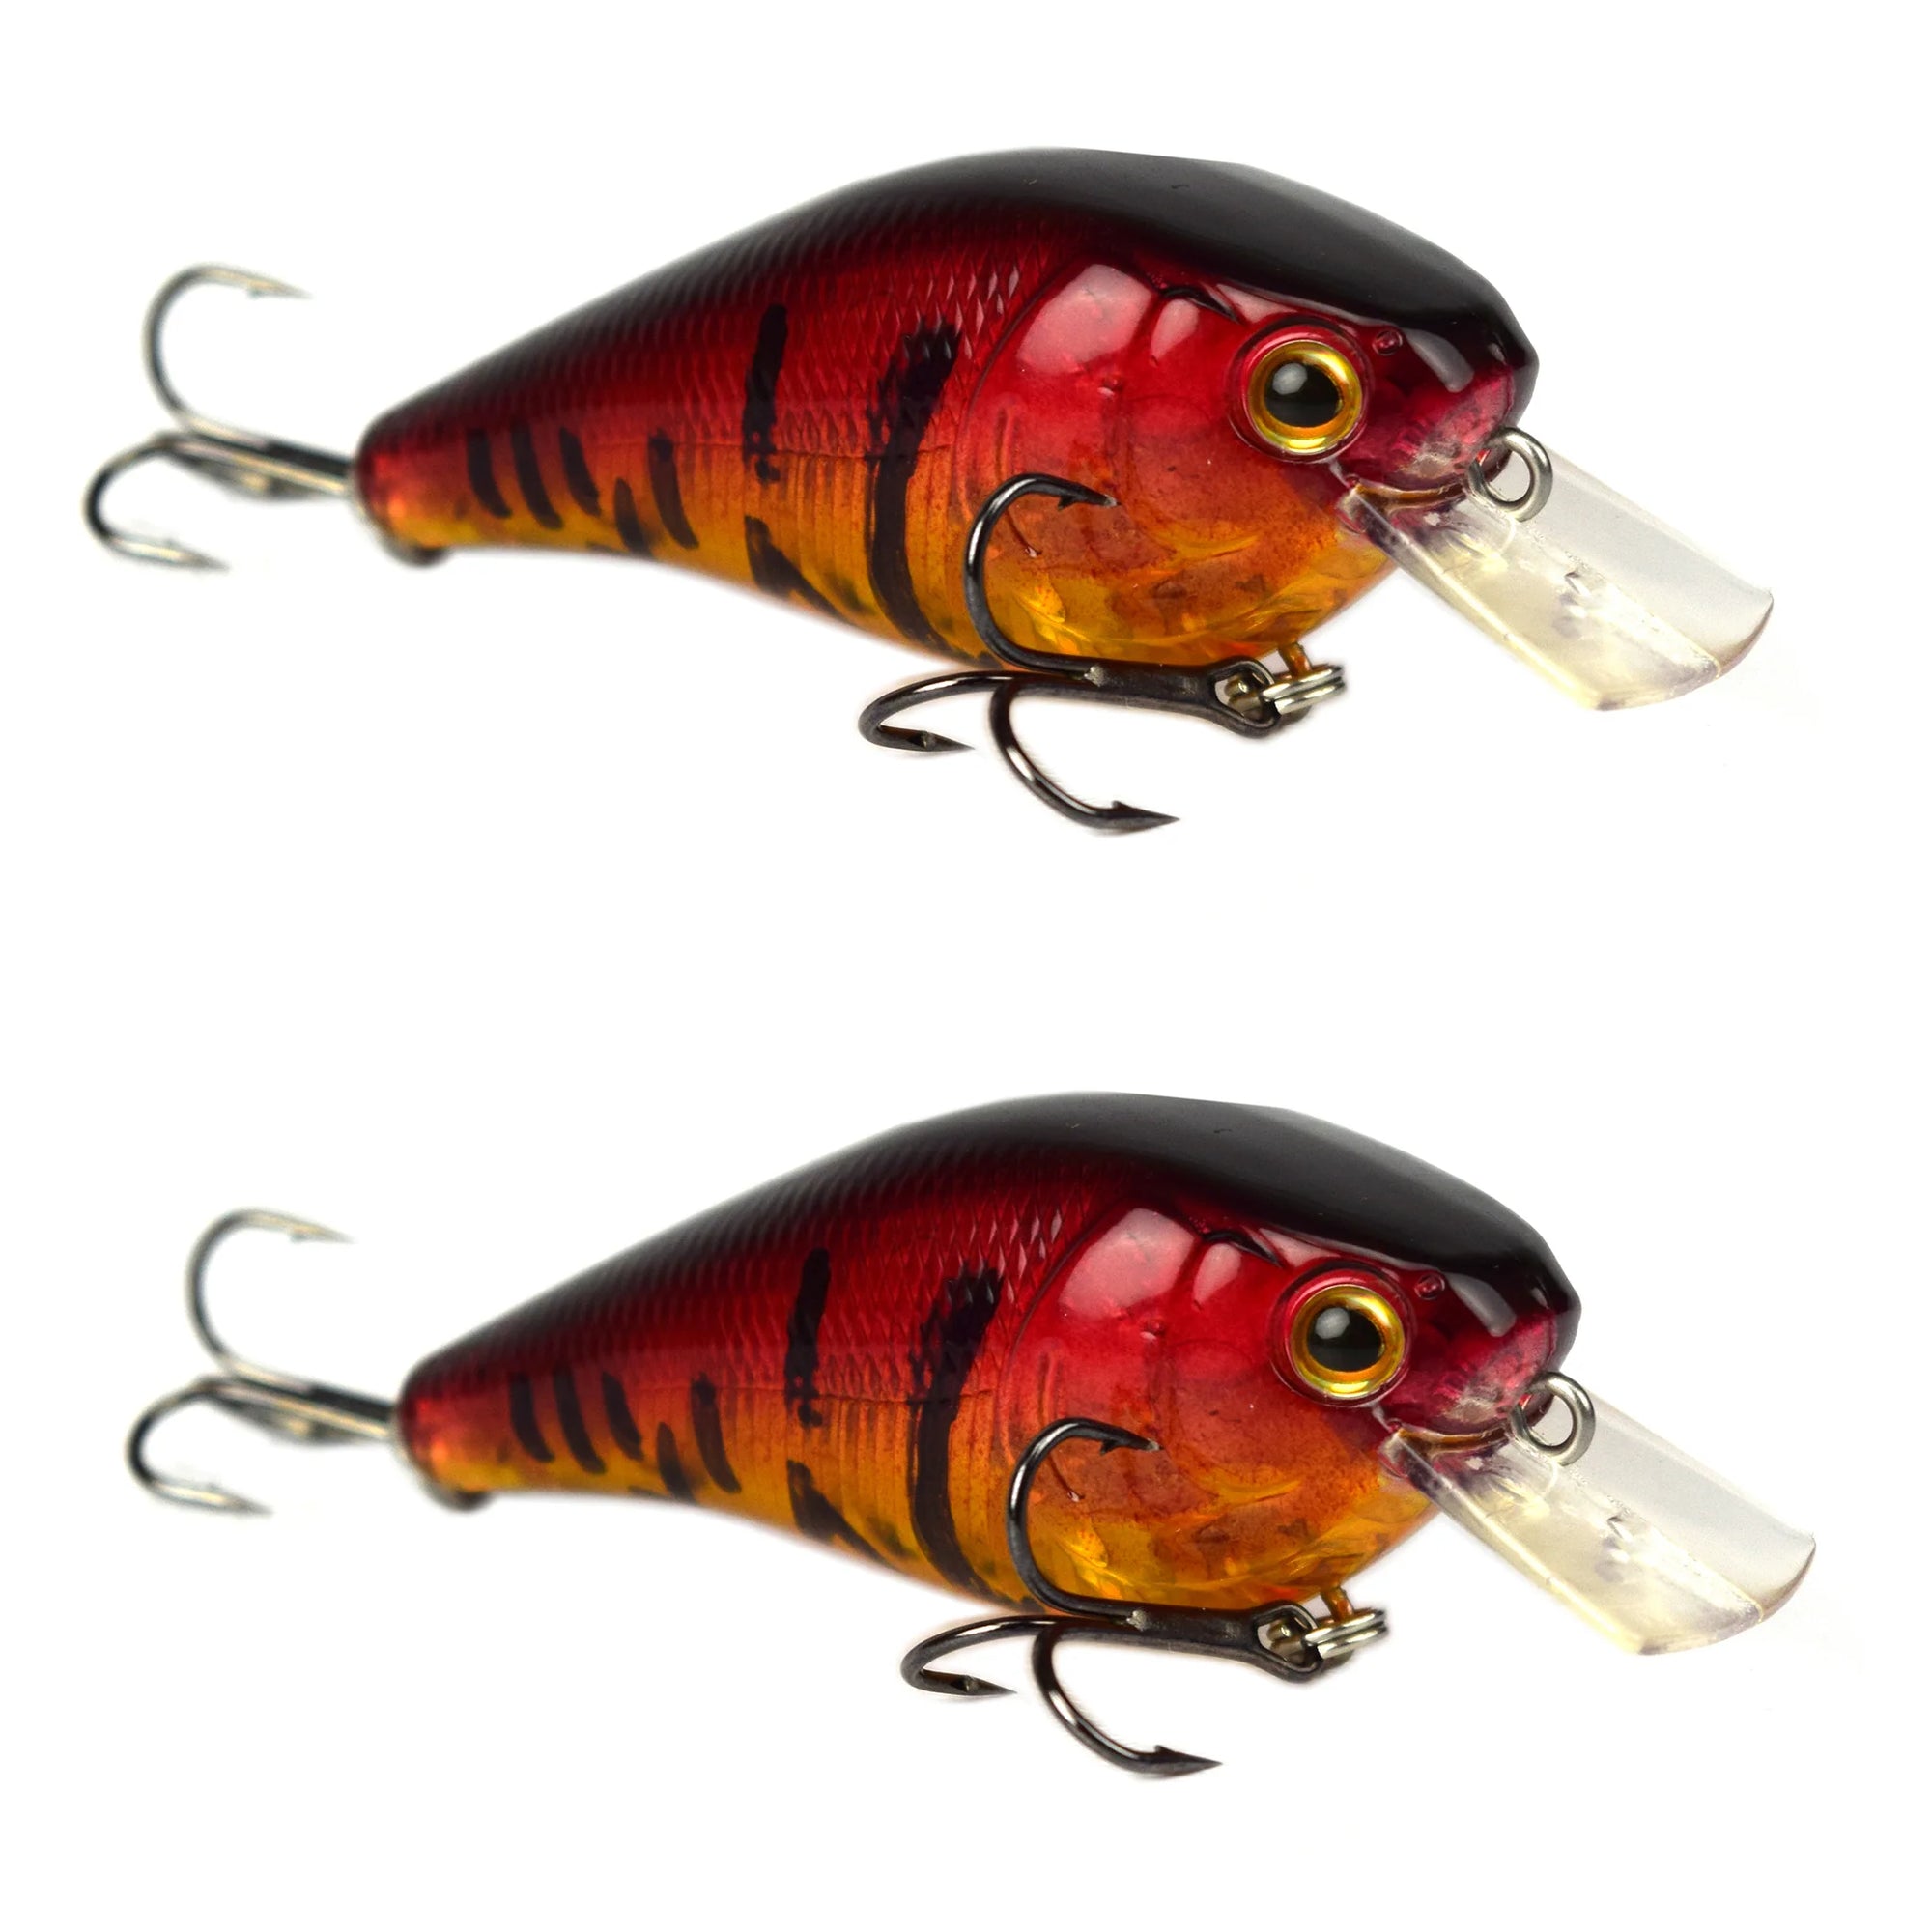 Tackle HD Square Bill #504-059 - Red Craw